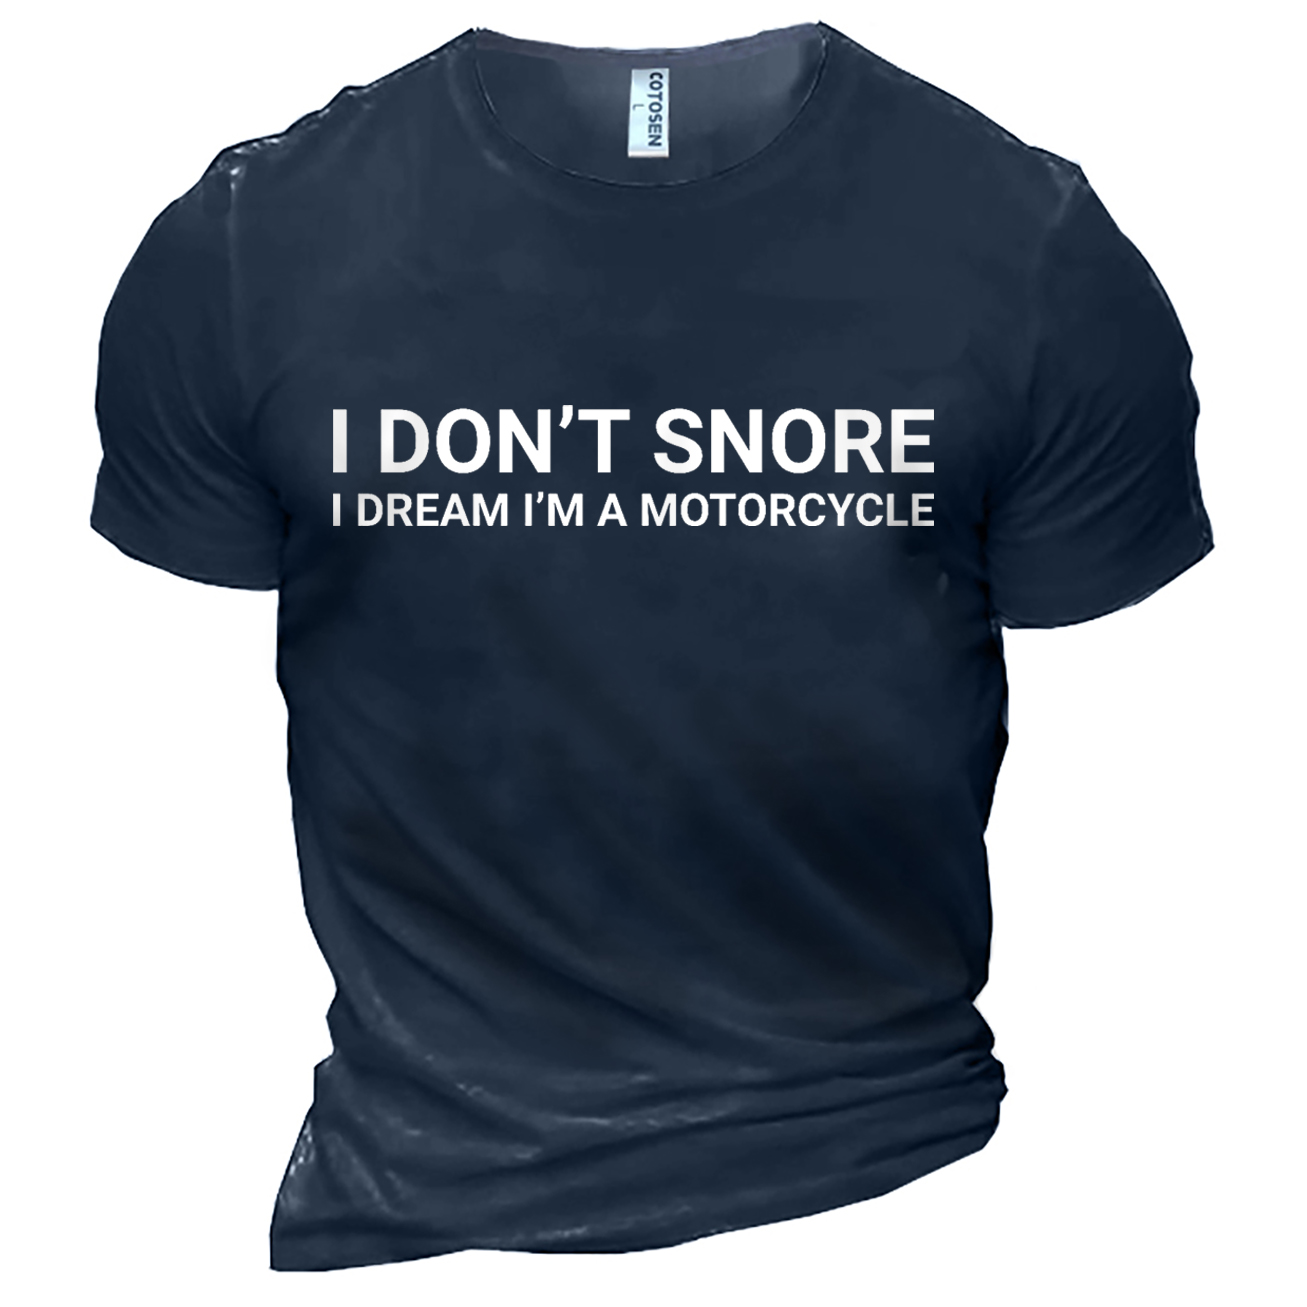 I Don't Snore I Chic Dream I'm A Motorcycle Men's Cotton T-shirt